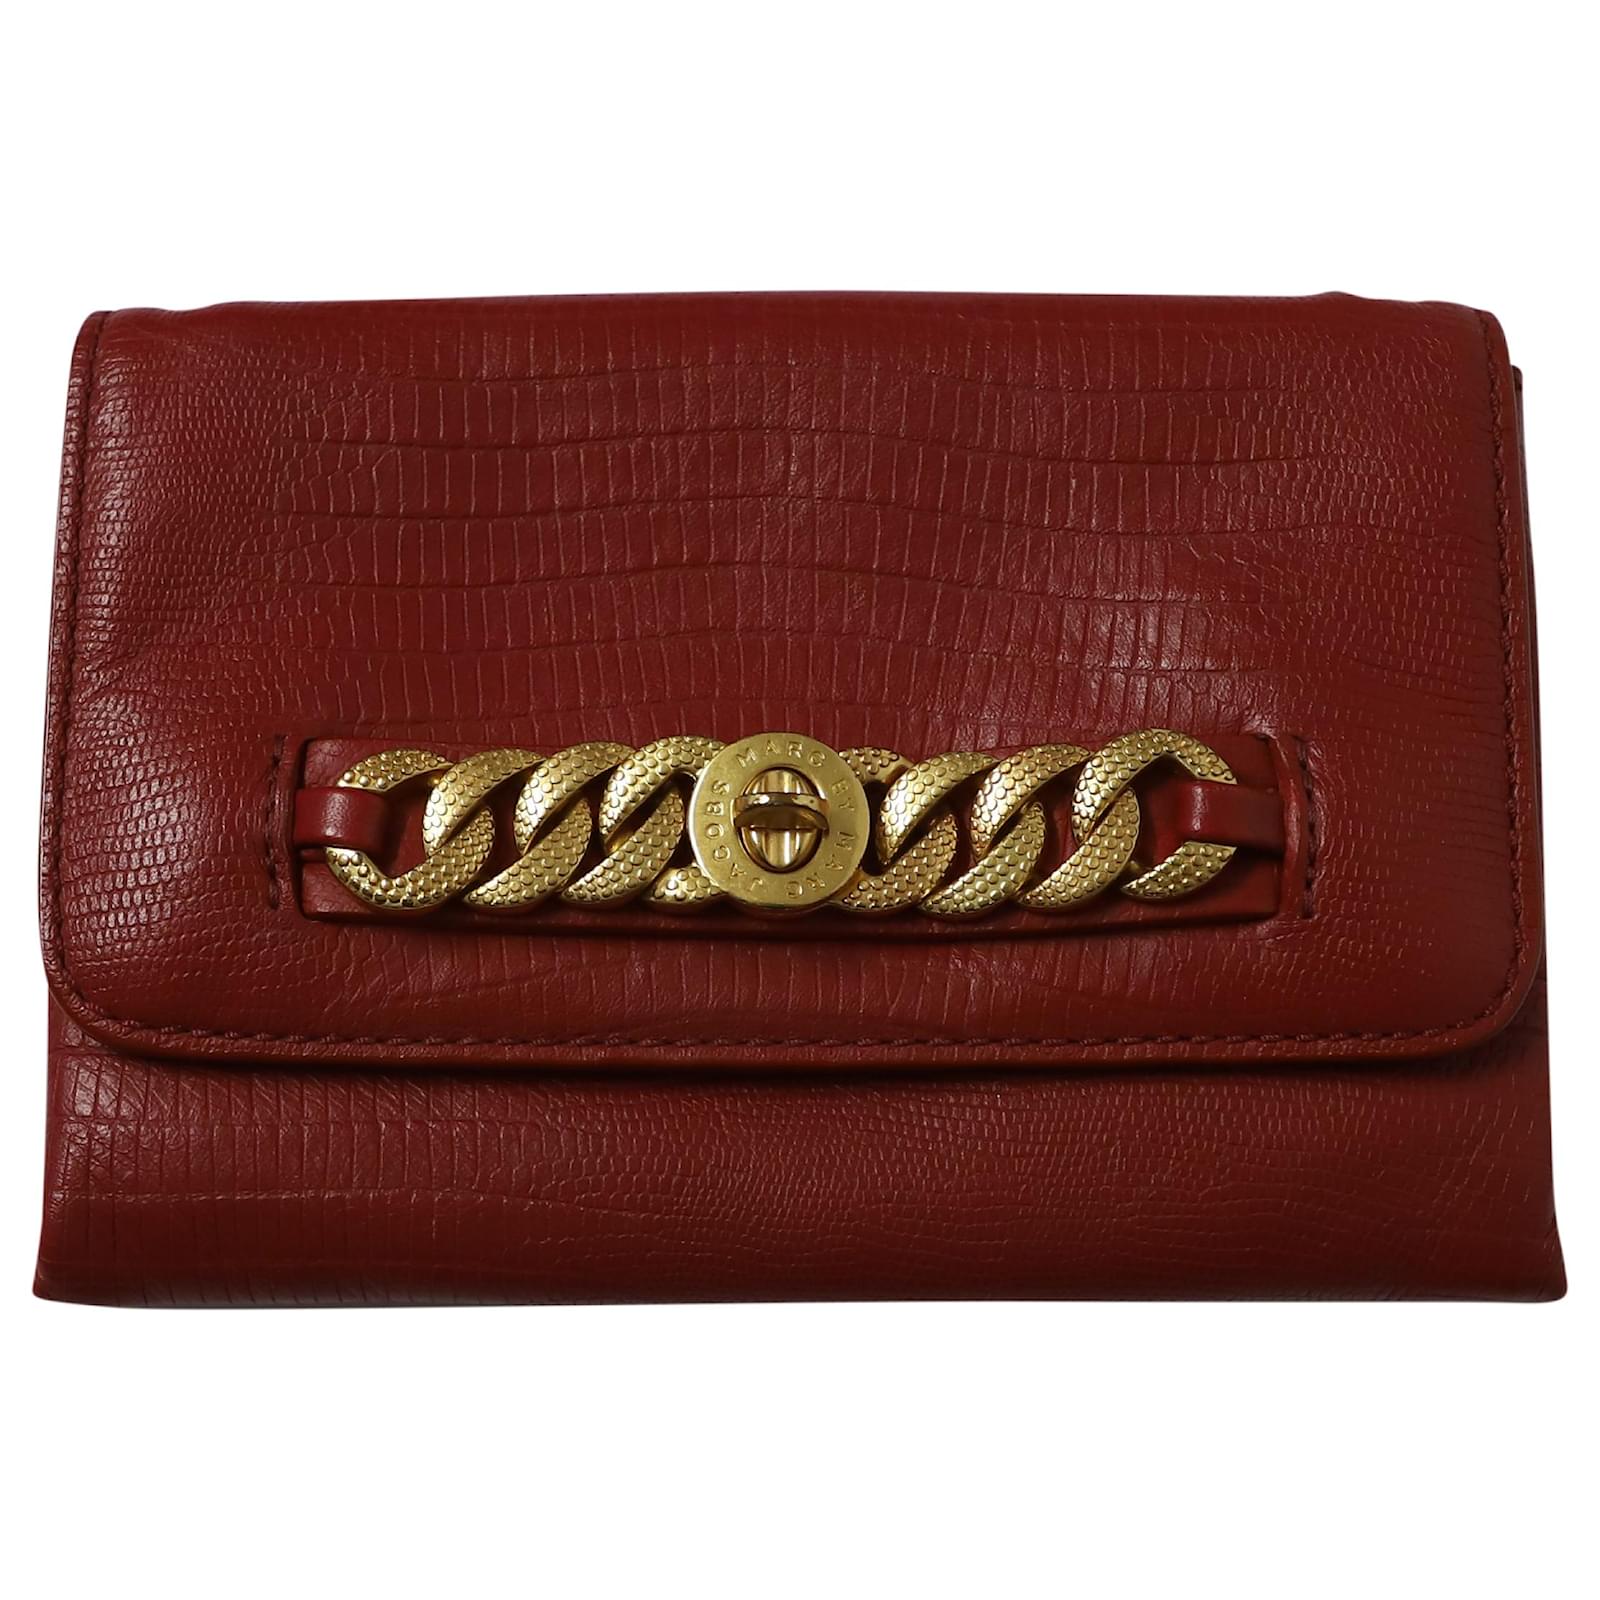 marc jacobs clutch tan leather with gold hardware